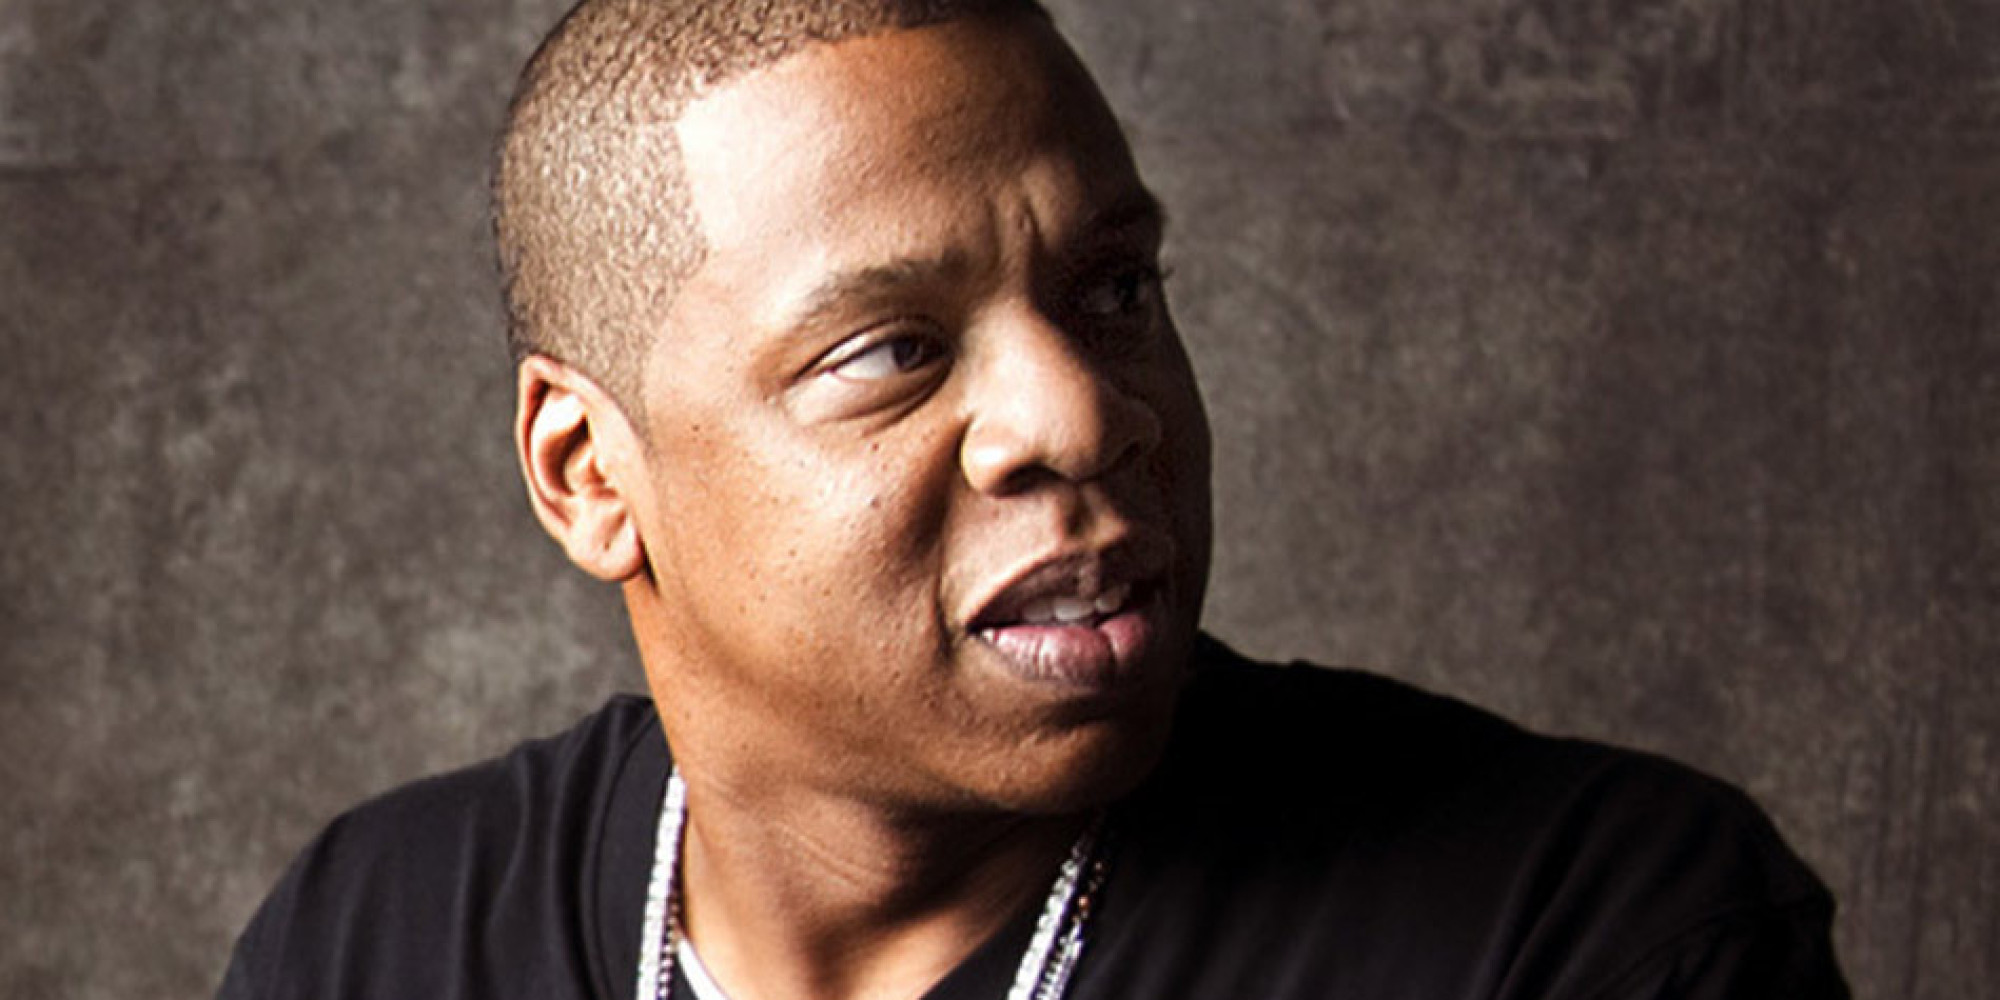 Tidal loses third CEO in two years